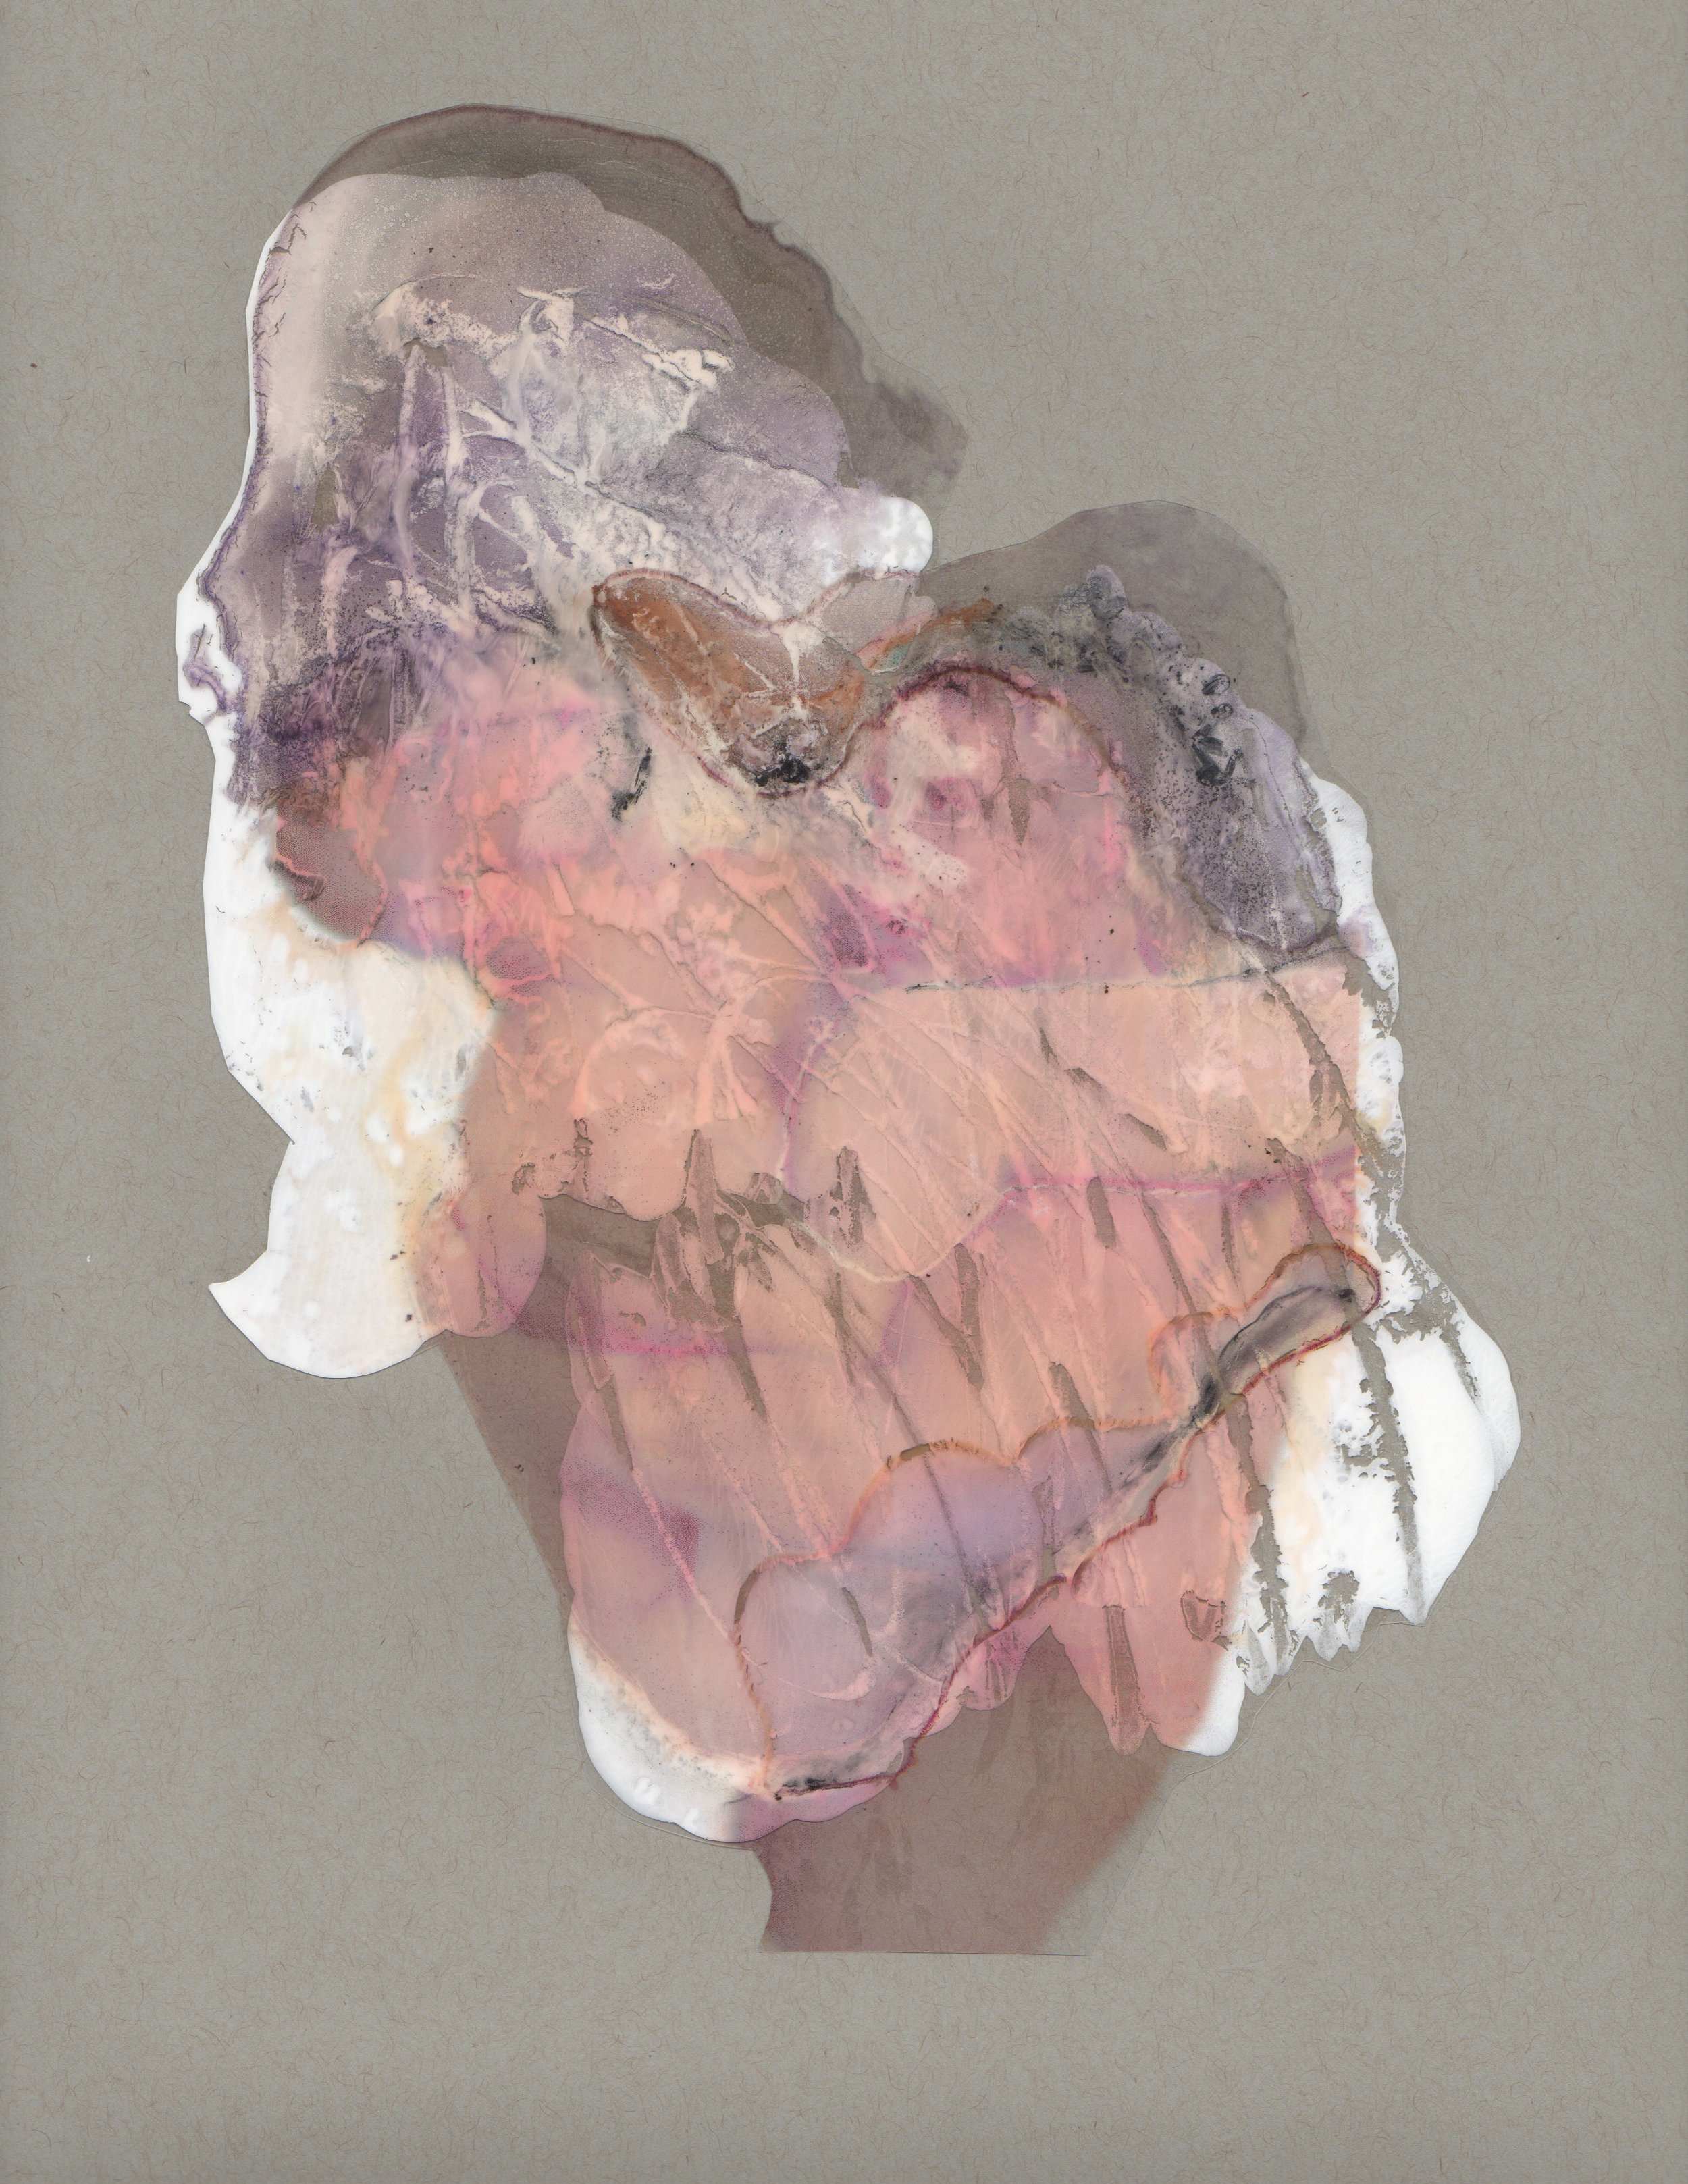 Energy and Matter, 2014, paint transparency archival ink and paper, 9x12 inches